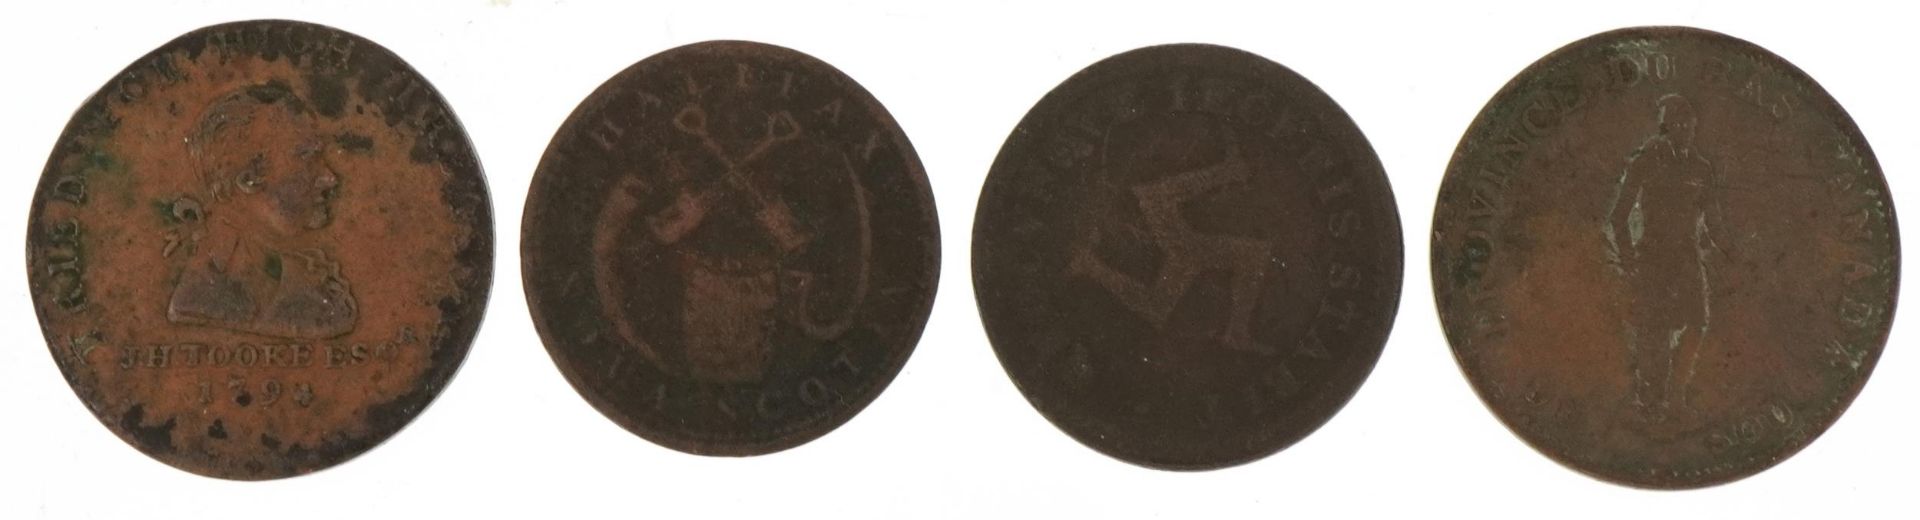 Four 17th/18th century halfpenny tokens including J H Tooke